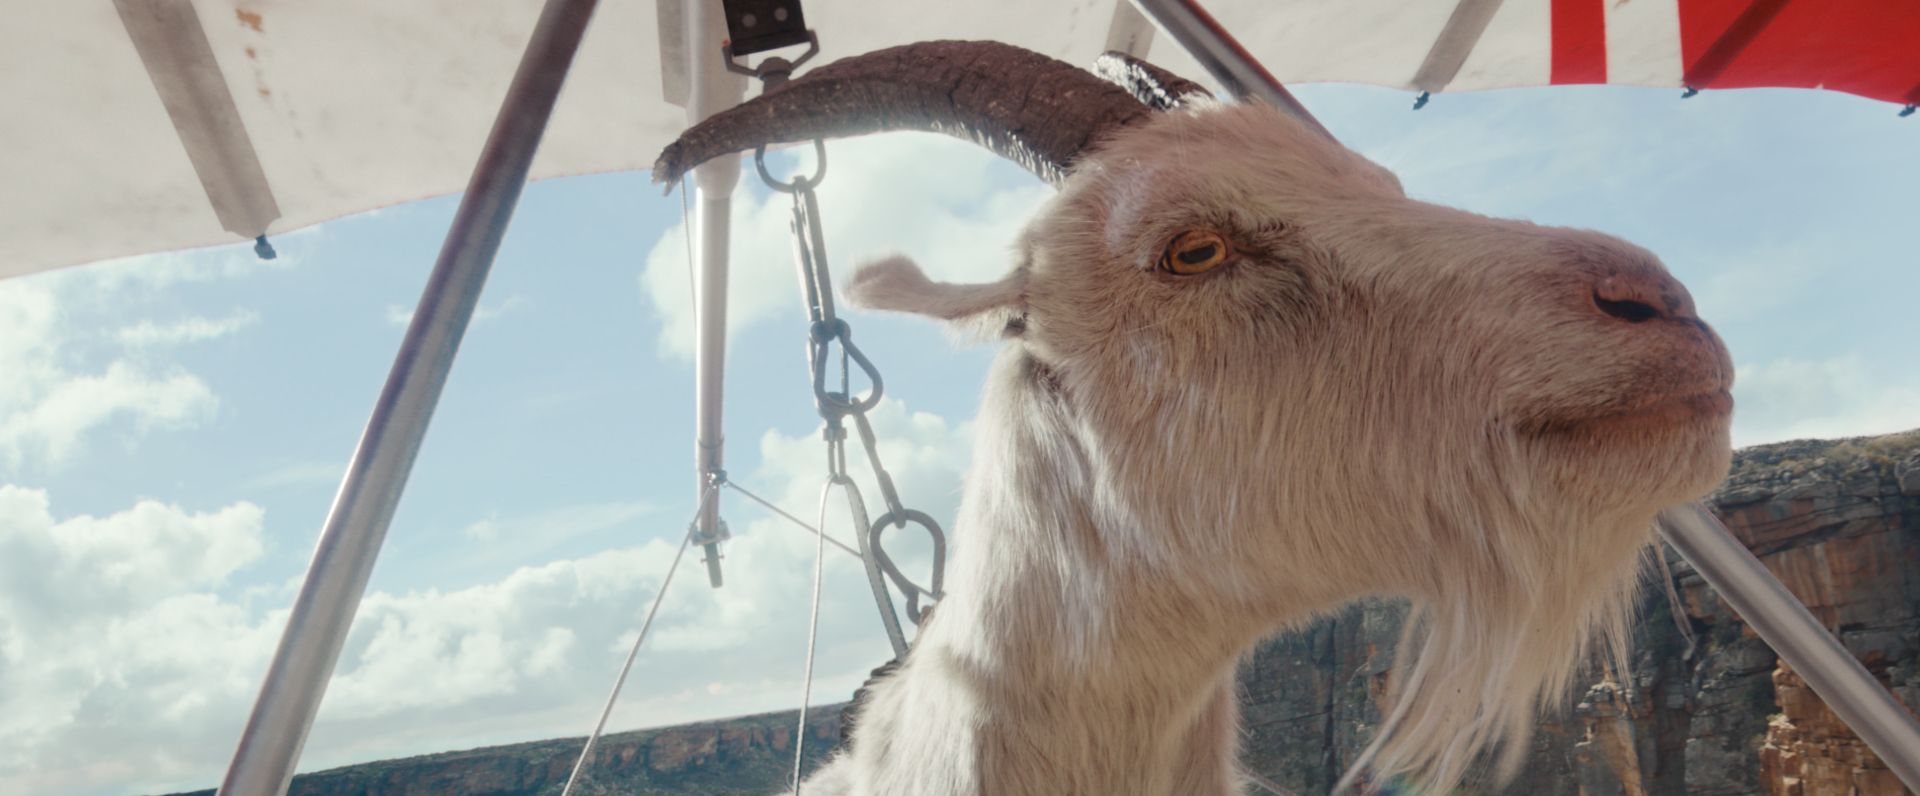 why-stumble-when-you-can-soar-a-hang-gliding-goat-reaches-new-heights